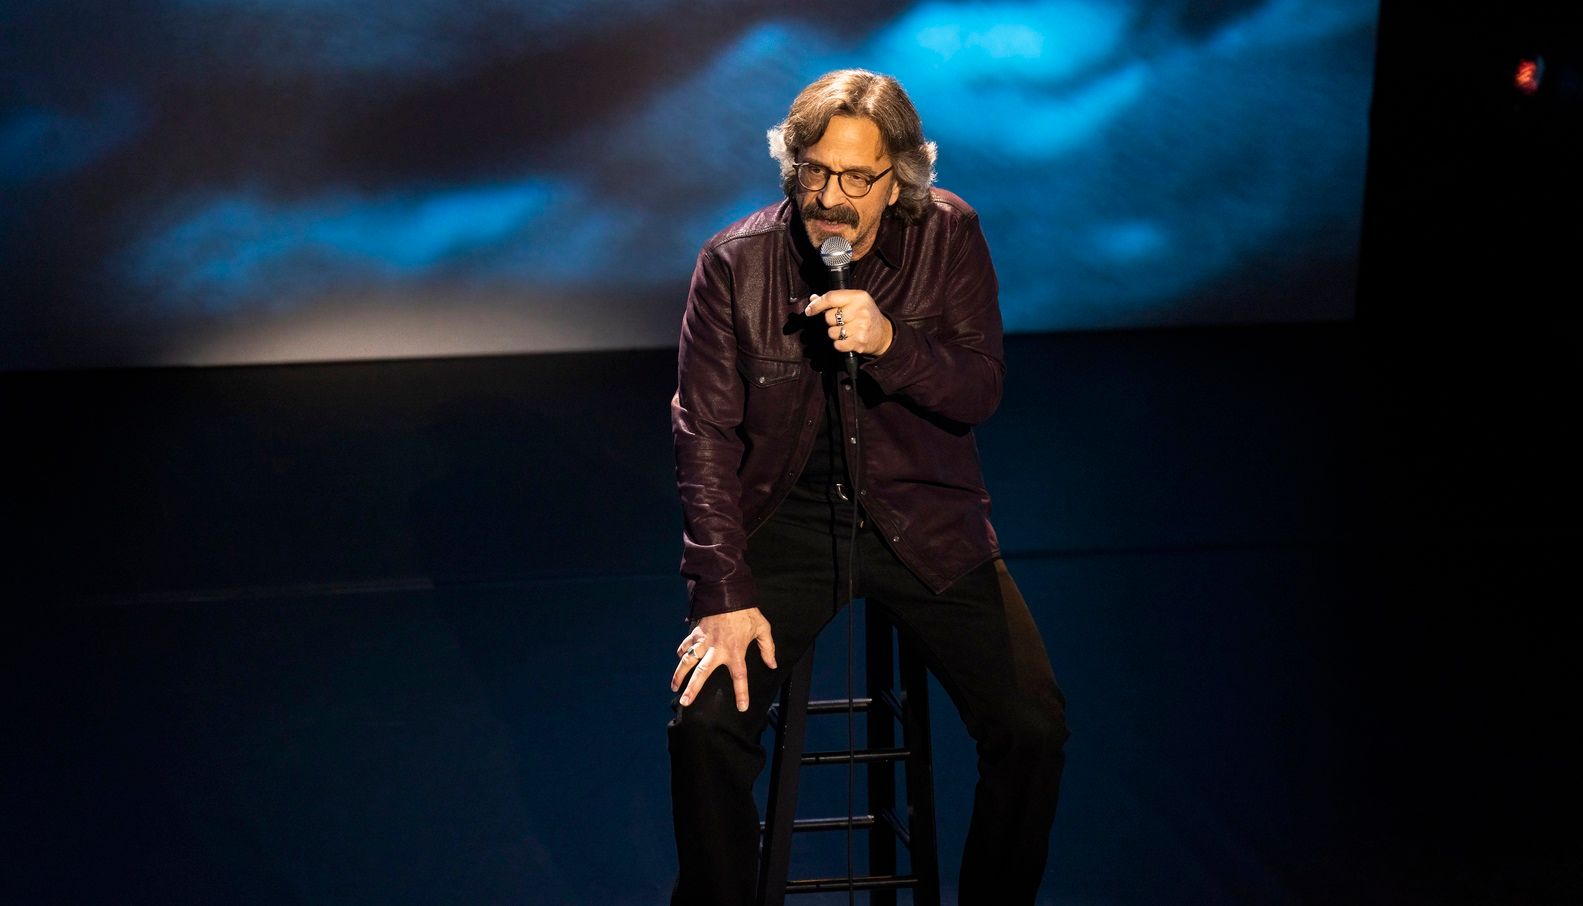 Marc Maron in his HBO comedy special, From Bleak to Dark